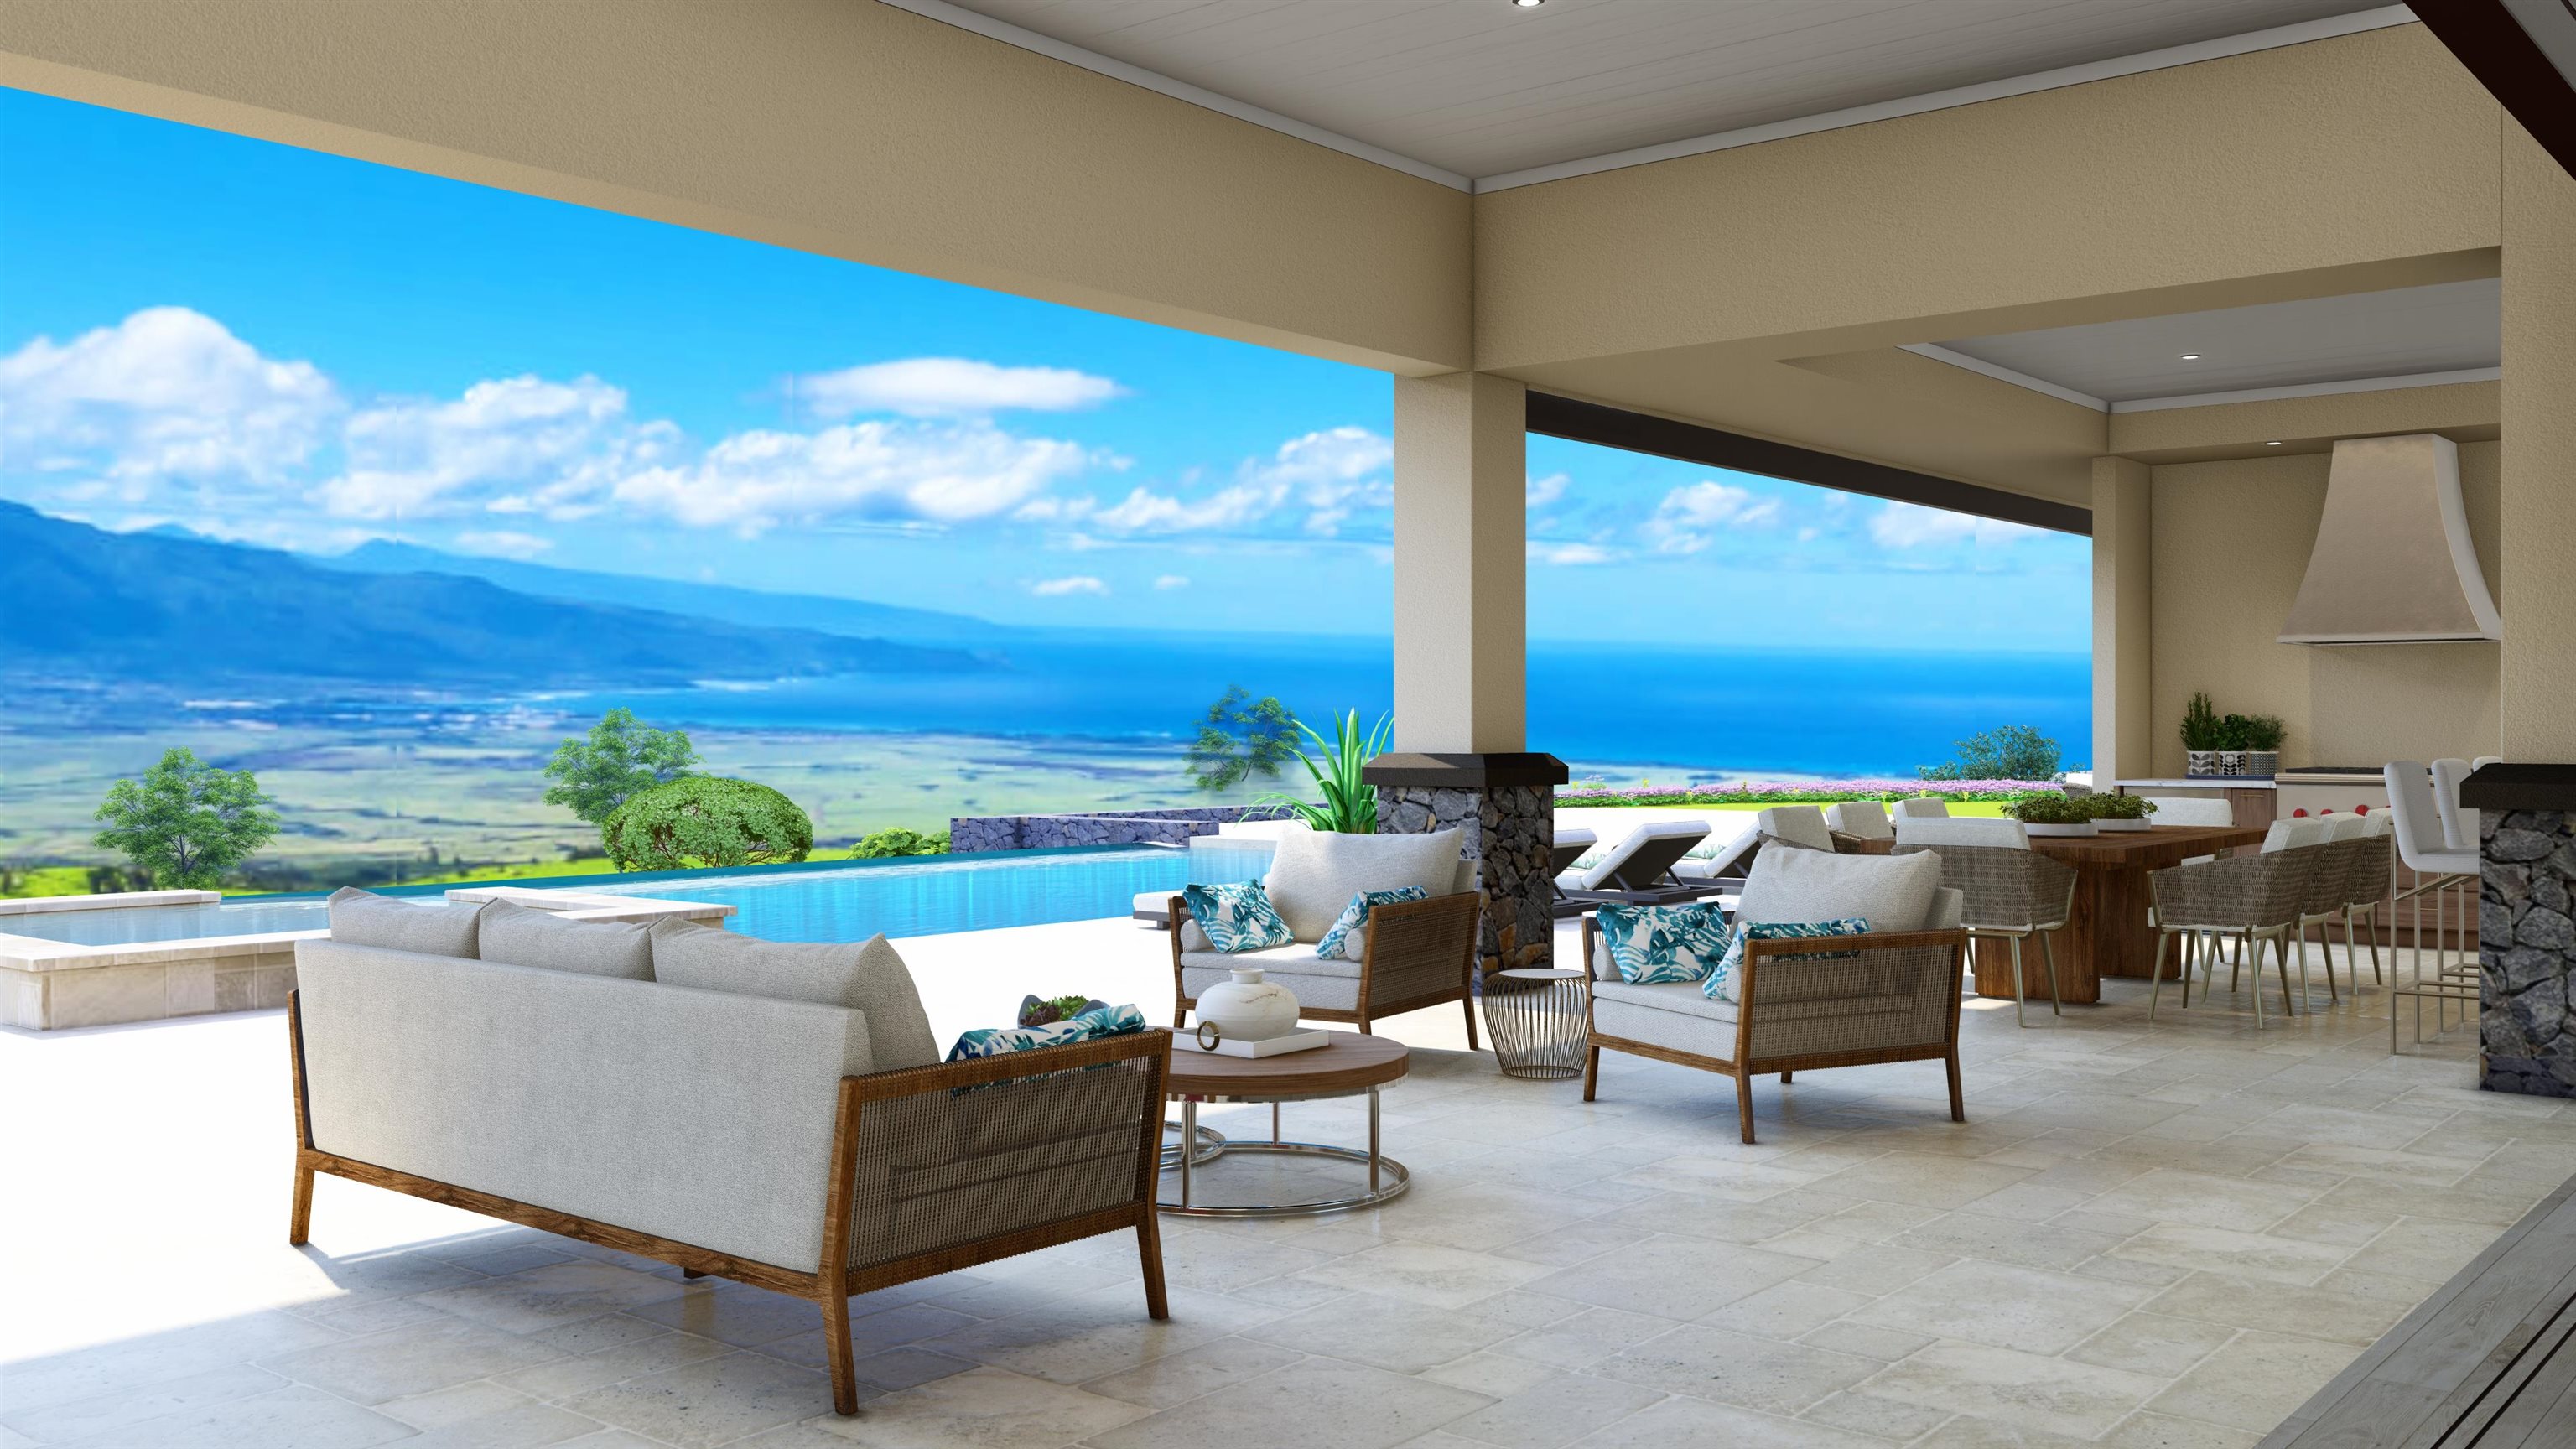 Sweeping ocean and mountain views define the landscape of this new luxury construction in Maui's gorgeous new development - Kula I'o. With a total of 6,216 sq. ft. of refined living space, including a 998 sq. ft. ohana, 2,344 sq. ft. of covered lanai space, and a garage/storage area of 1,728 sq. ft. The home is scheduled to be completed by December 15, 2022.  The home sits on 3.6 glorious acres in Kula I'o. This new luxury construction built by Crescent Homes Maui will boast the very best finishes and construction materials, with fine tile and stone used throughout, custom wood cabinetry, luxurious bathroom fixtures, and best-in-class appliances in the kitchen including a 36" Wolf Gas Range, a 24" Wolf Standard Microwave, a Cove Dishwasher and a Subzero Refrigerator.  The main home's design presents two wings flanking the great room adjacent to the kitchen and dining room. The great room opens onto a stunning lanai with a covered built-in barbecue area, pool, and jetted spa.   The left wing is home to the first master suite, which has a privacy garden, dressing room, and luxurious bath. Two additional bedrooms, each with en-suite baths, are located on the same wing.  The right wing houses the second master suite, which has direct access to the covered lanai and a privacy garden; the second master boasts its own luxurious bathroom and dressing area. Another guest room and a media room are also located on this wing.  The separate, two-bedroom, two-bath ohana offers a private garage, living room and kitchen, and covered lanai with barbecue. The ohana is self-contained, making it ideal for guests and visiting family.   Kula I'o is a beautiful new development offering gorgeous views of South and West Maui coastlines.